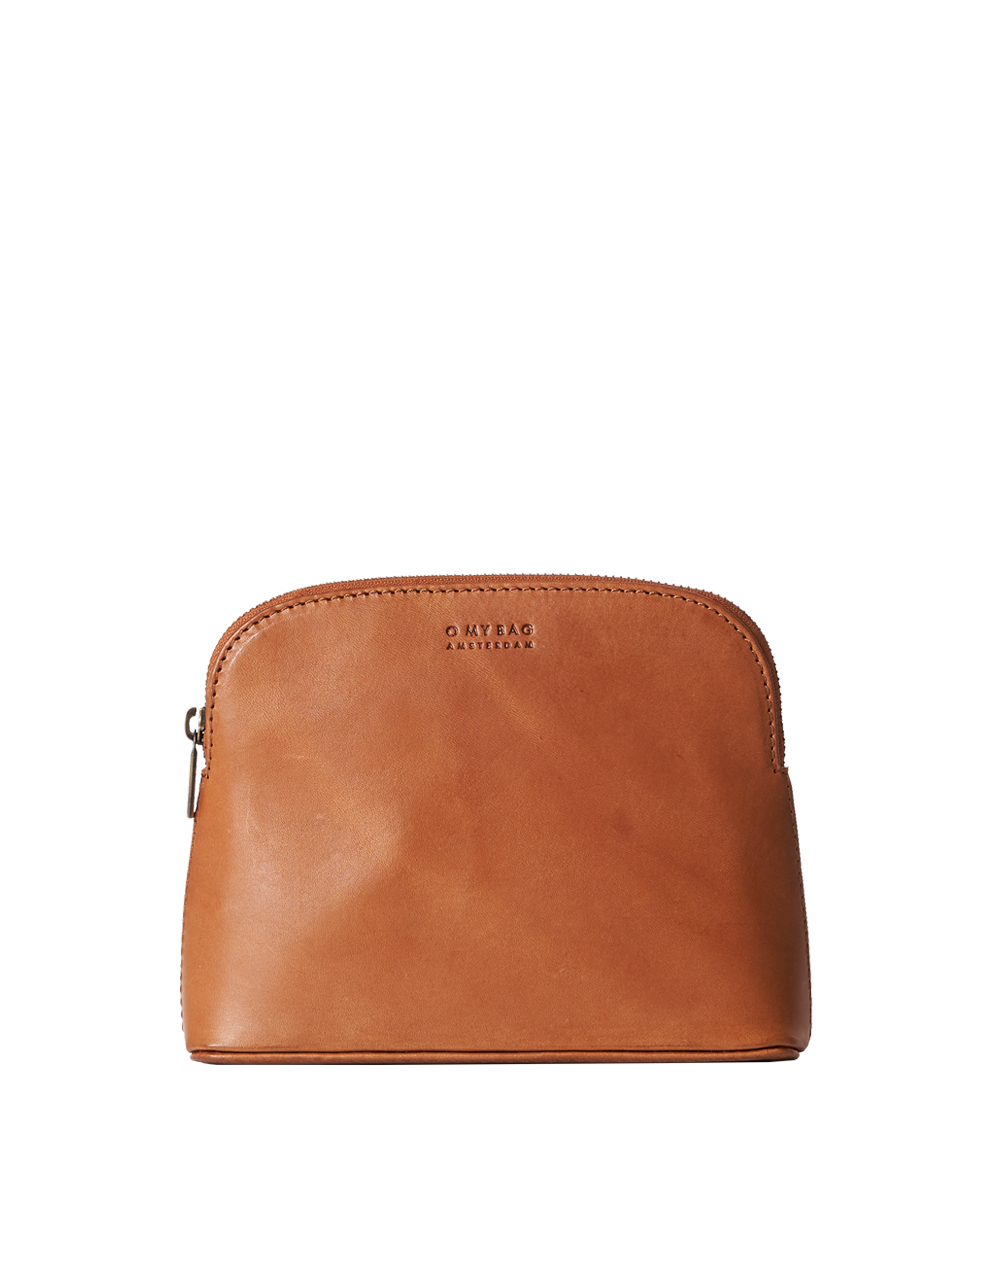 O My Bag - Cosmetic Bag - Cognac Classic Leather